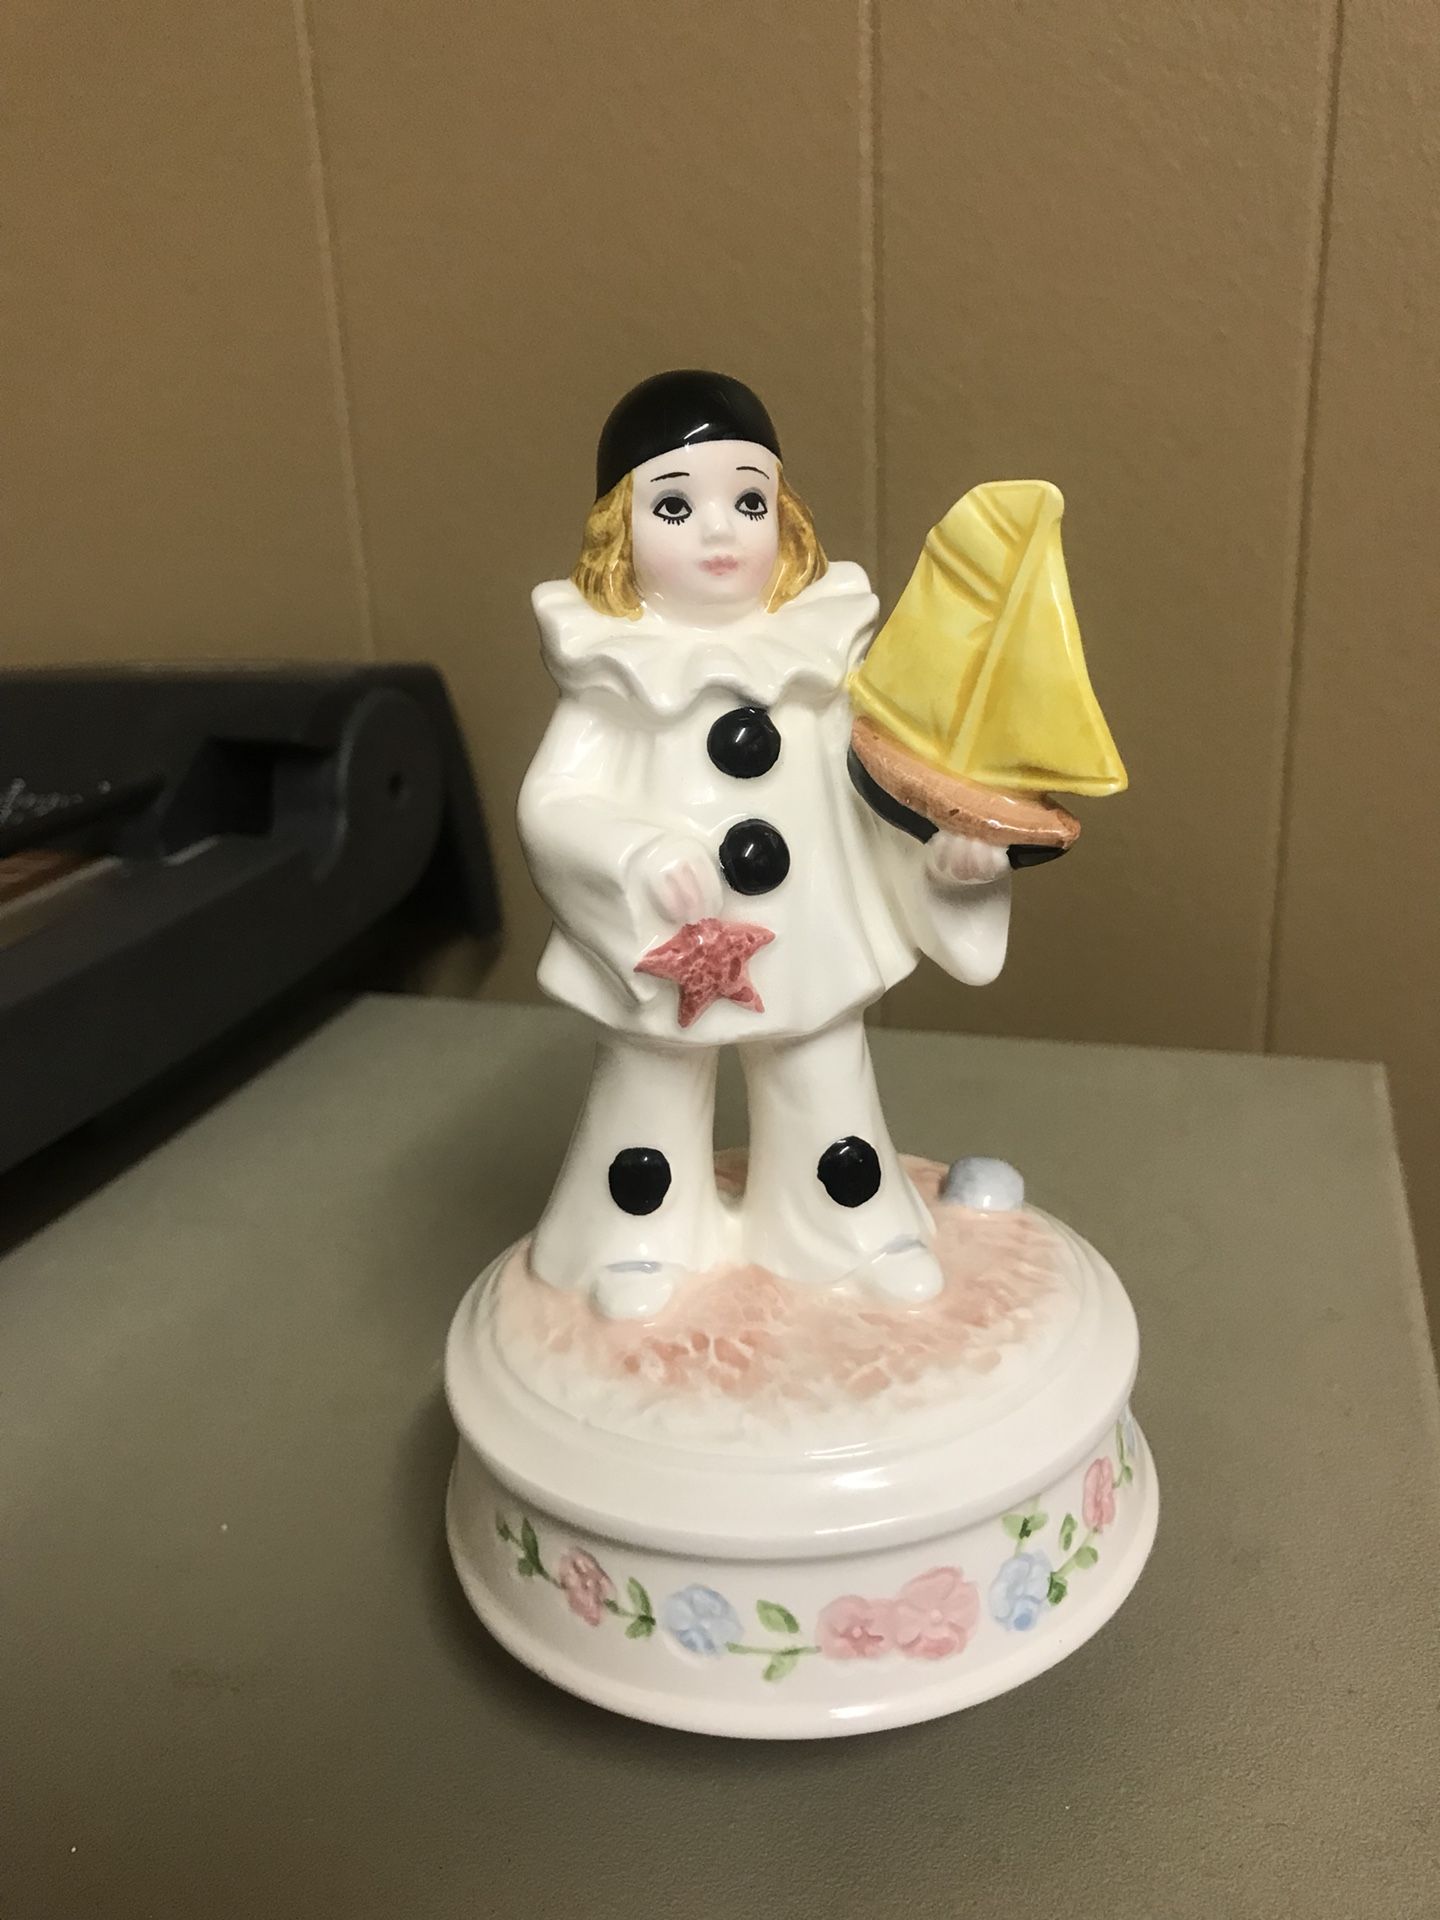 Schmid peirott love girl clown figurine holding yellow sailboat. Plays my favorite things from the sound of music. It turns when plays. But is slow